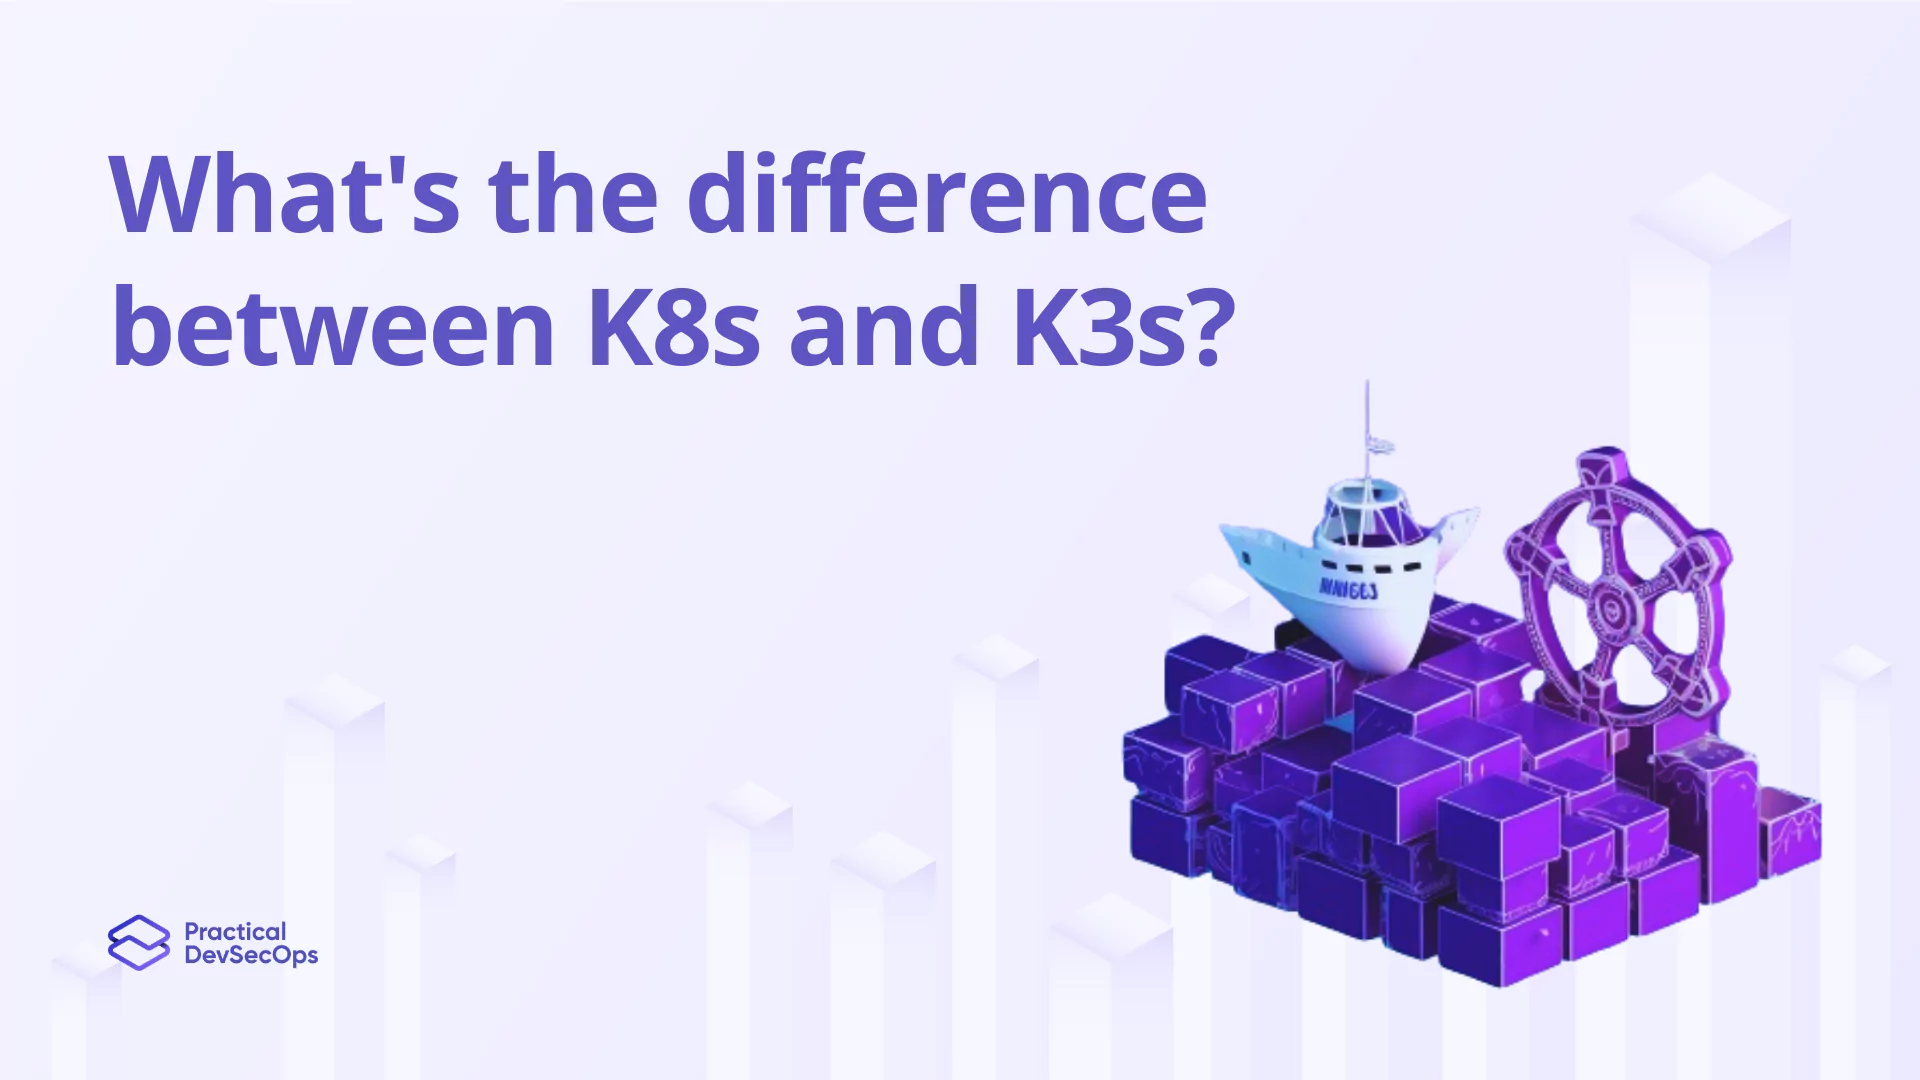 What’s the difference between K8s and K3s?